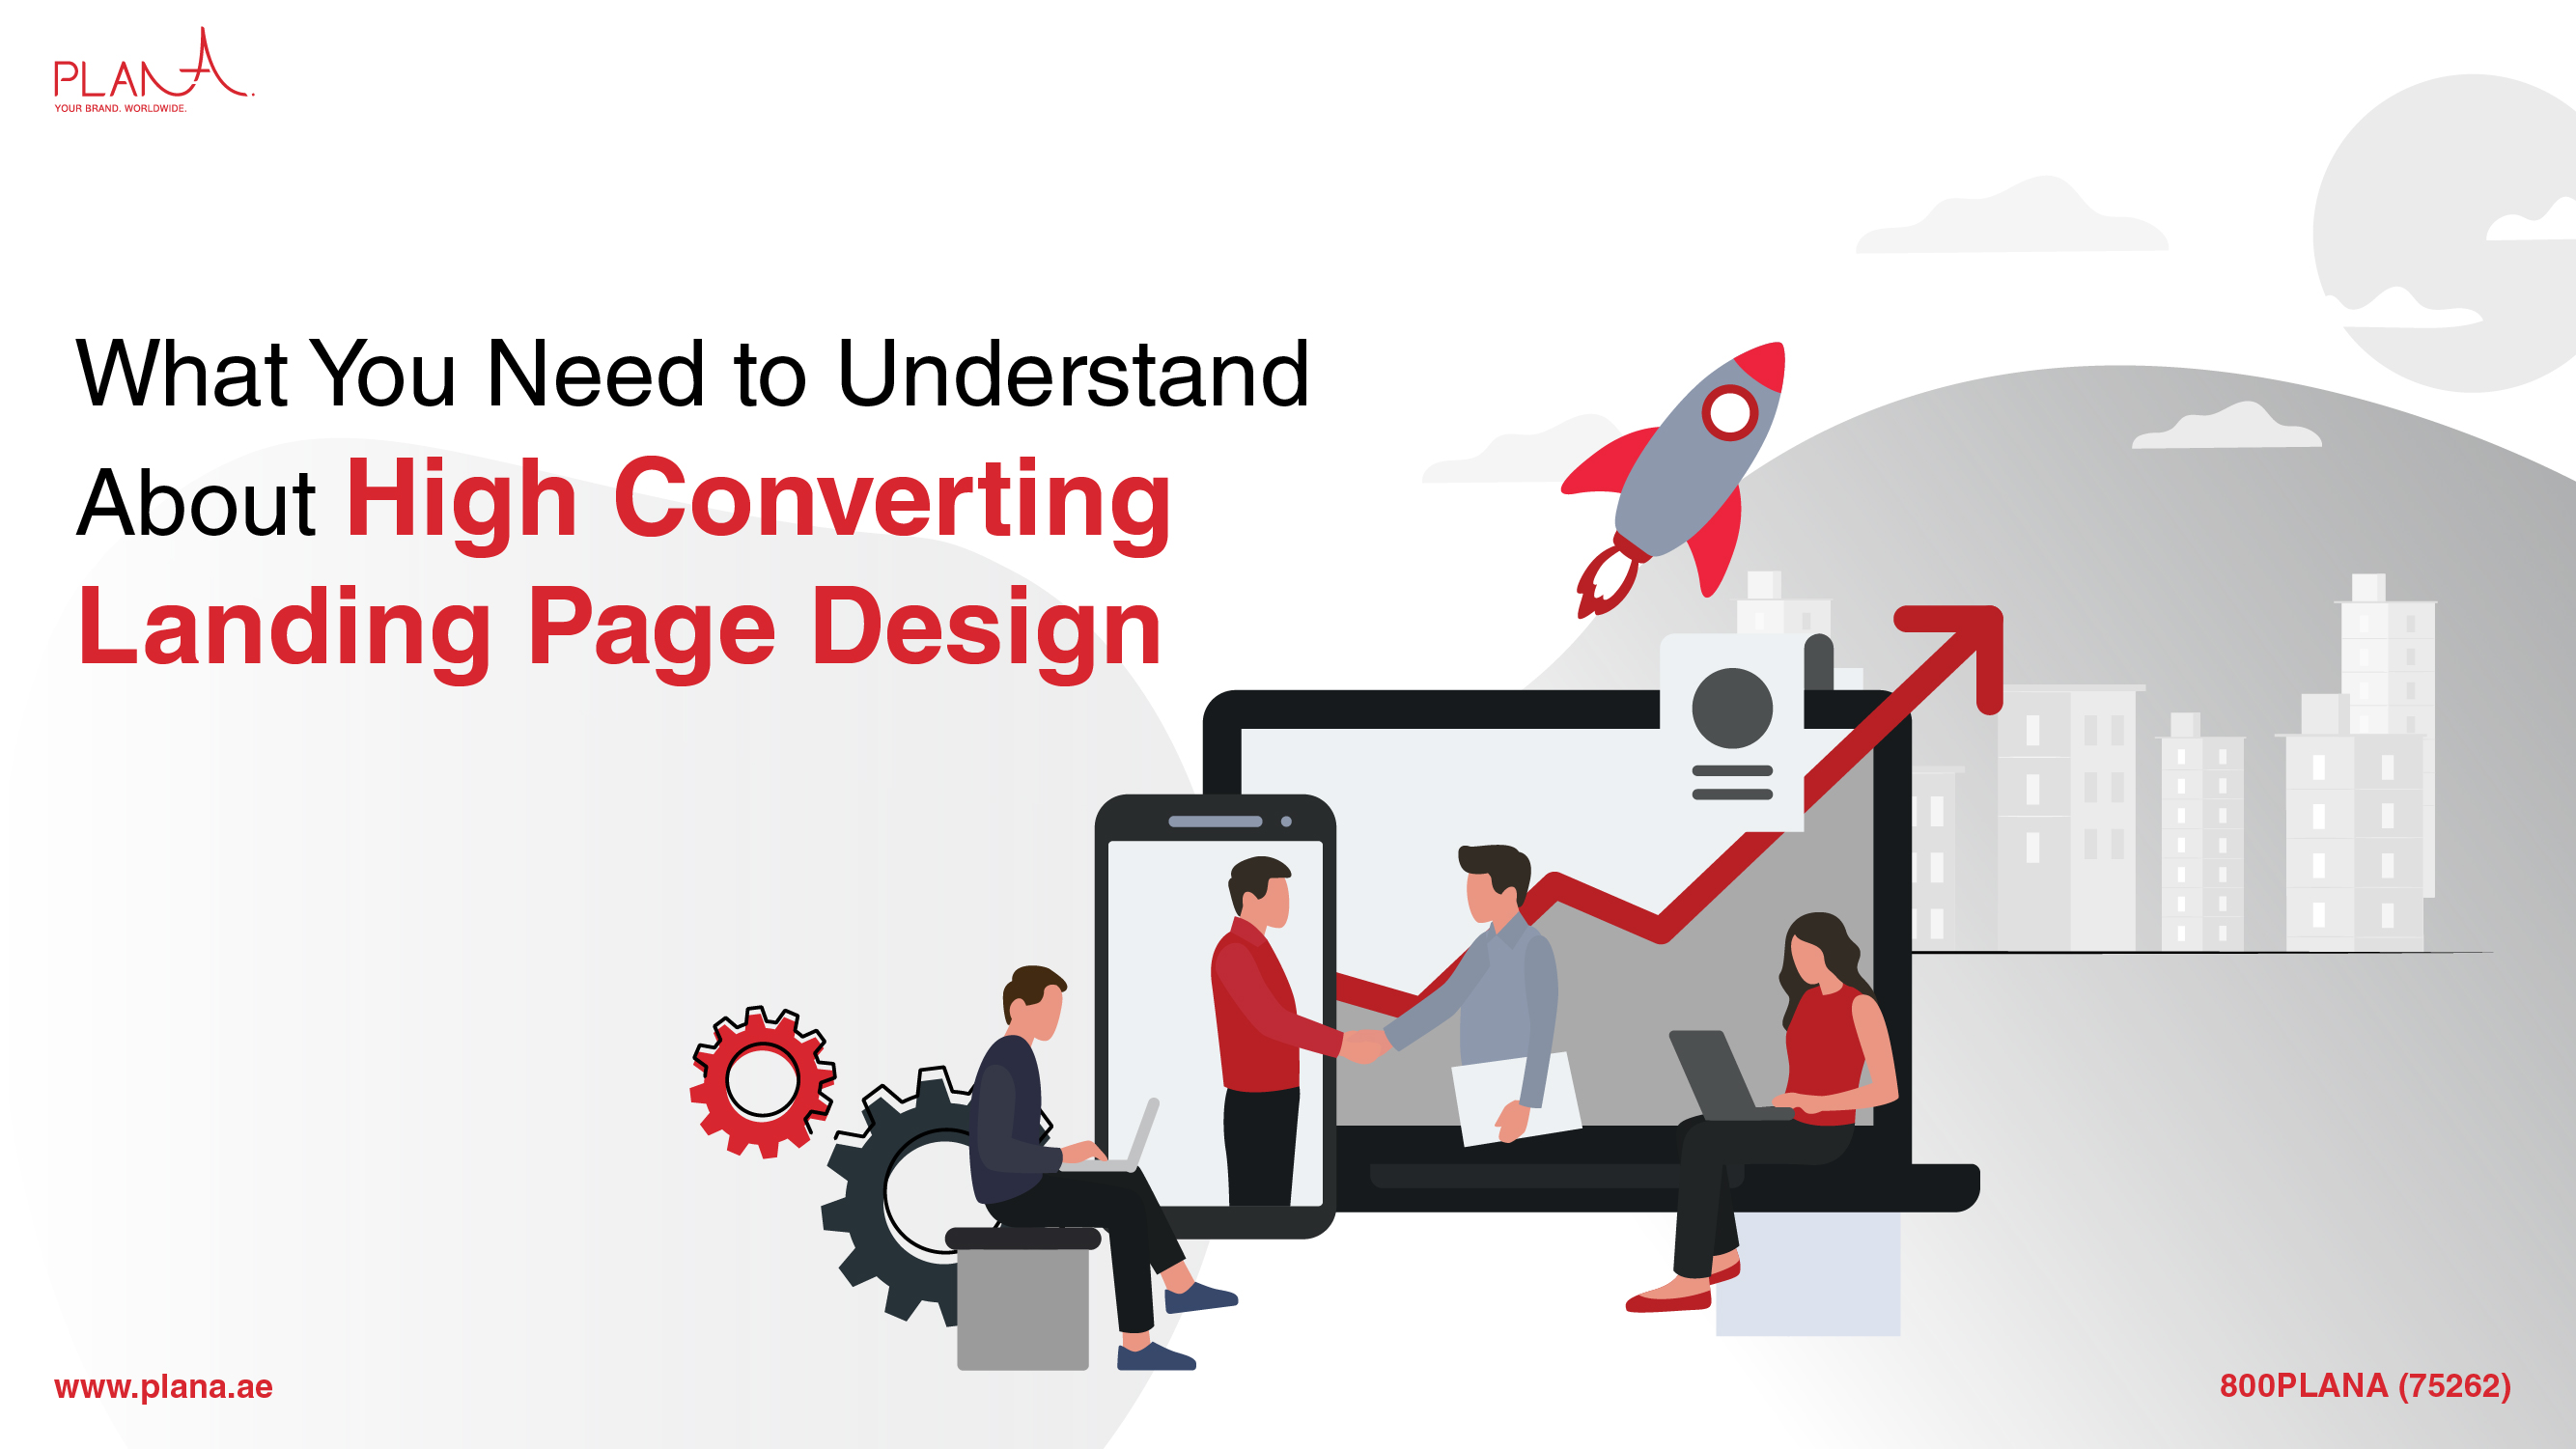 What You Need to Understand About High Converting Landing Page Design